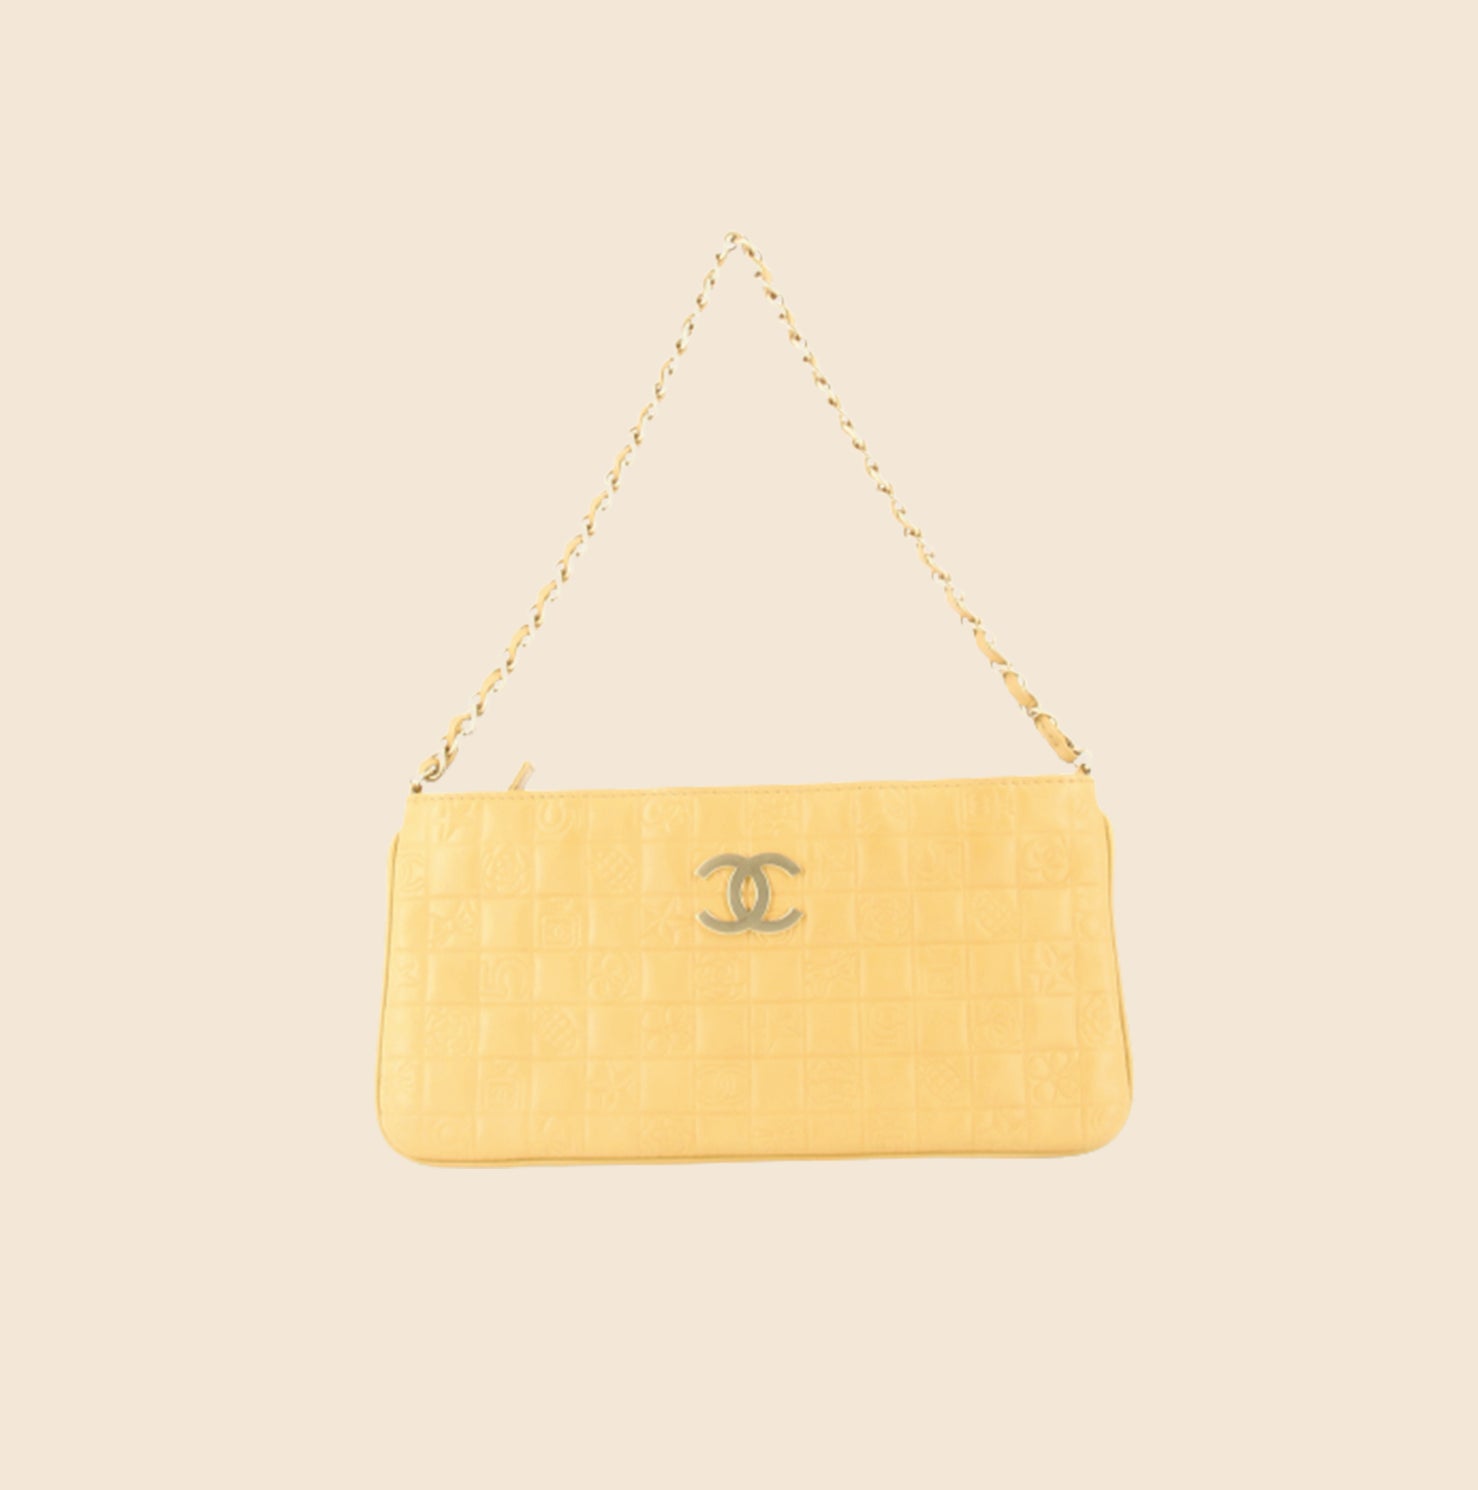 Authentic Chanel No.5 Coco Small Canvas Flap Bag